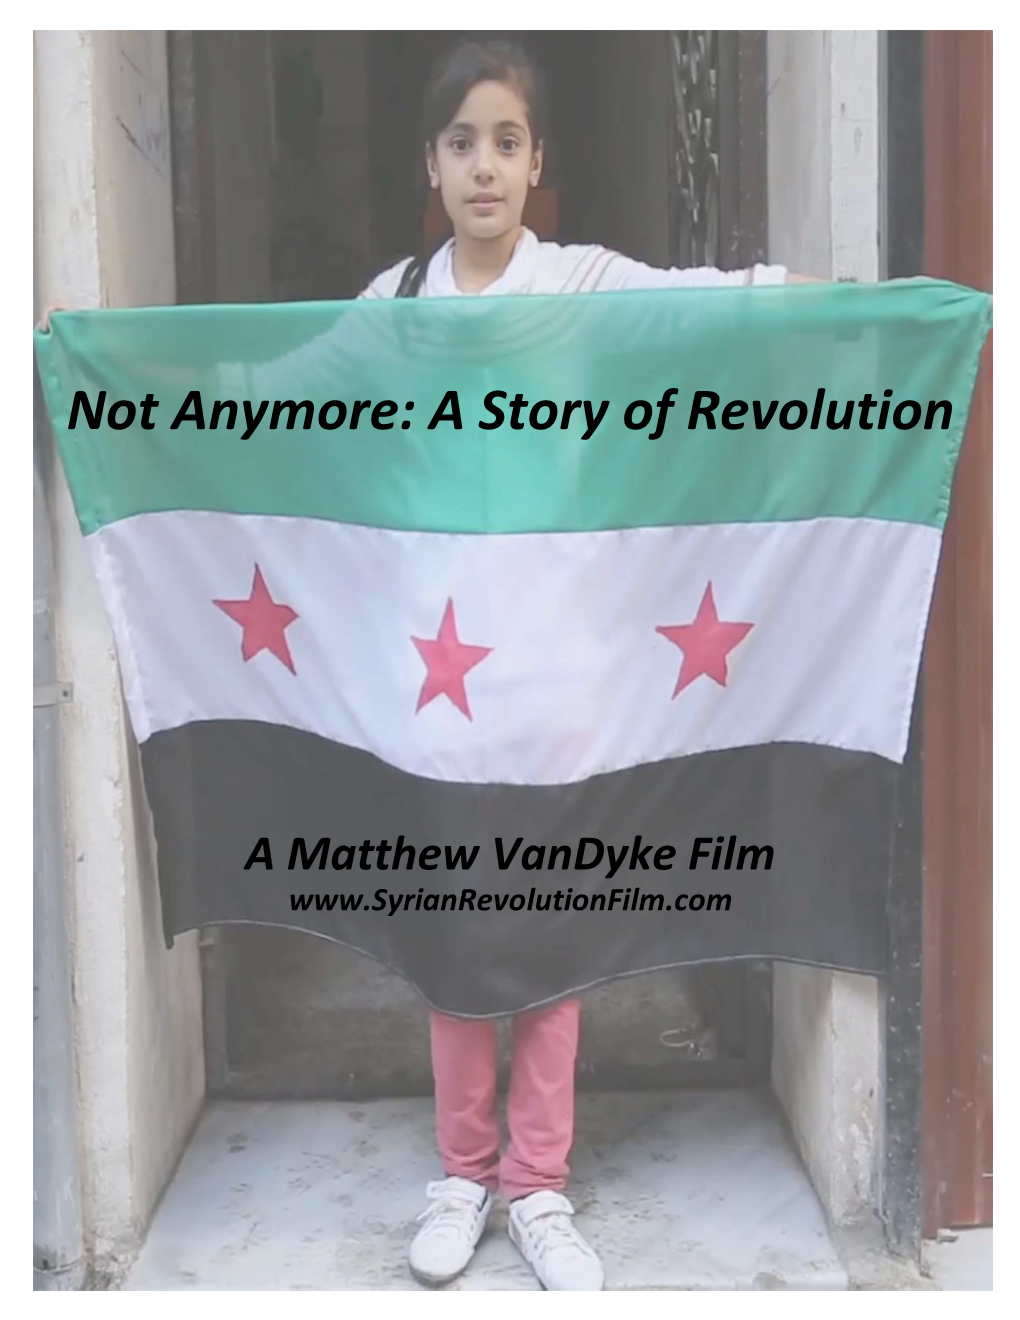 Not Anymore: a Story of Revolution